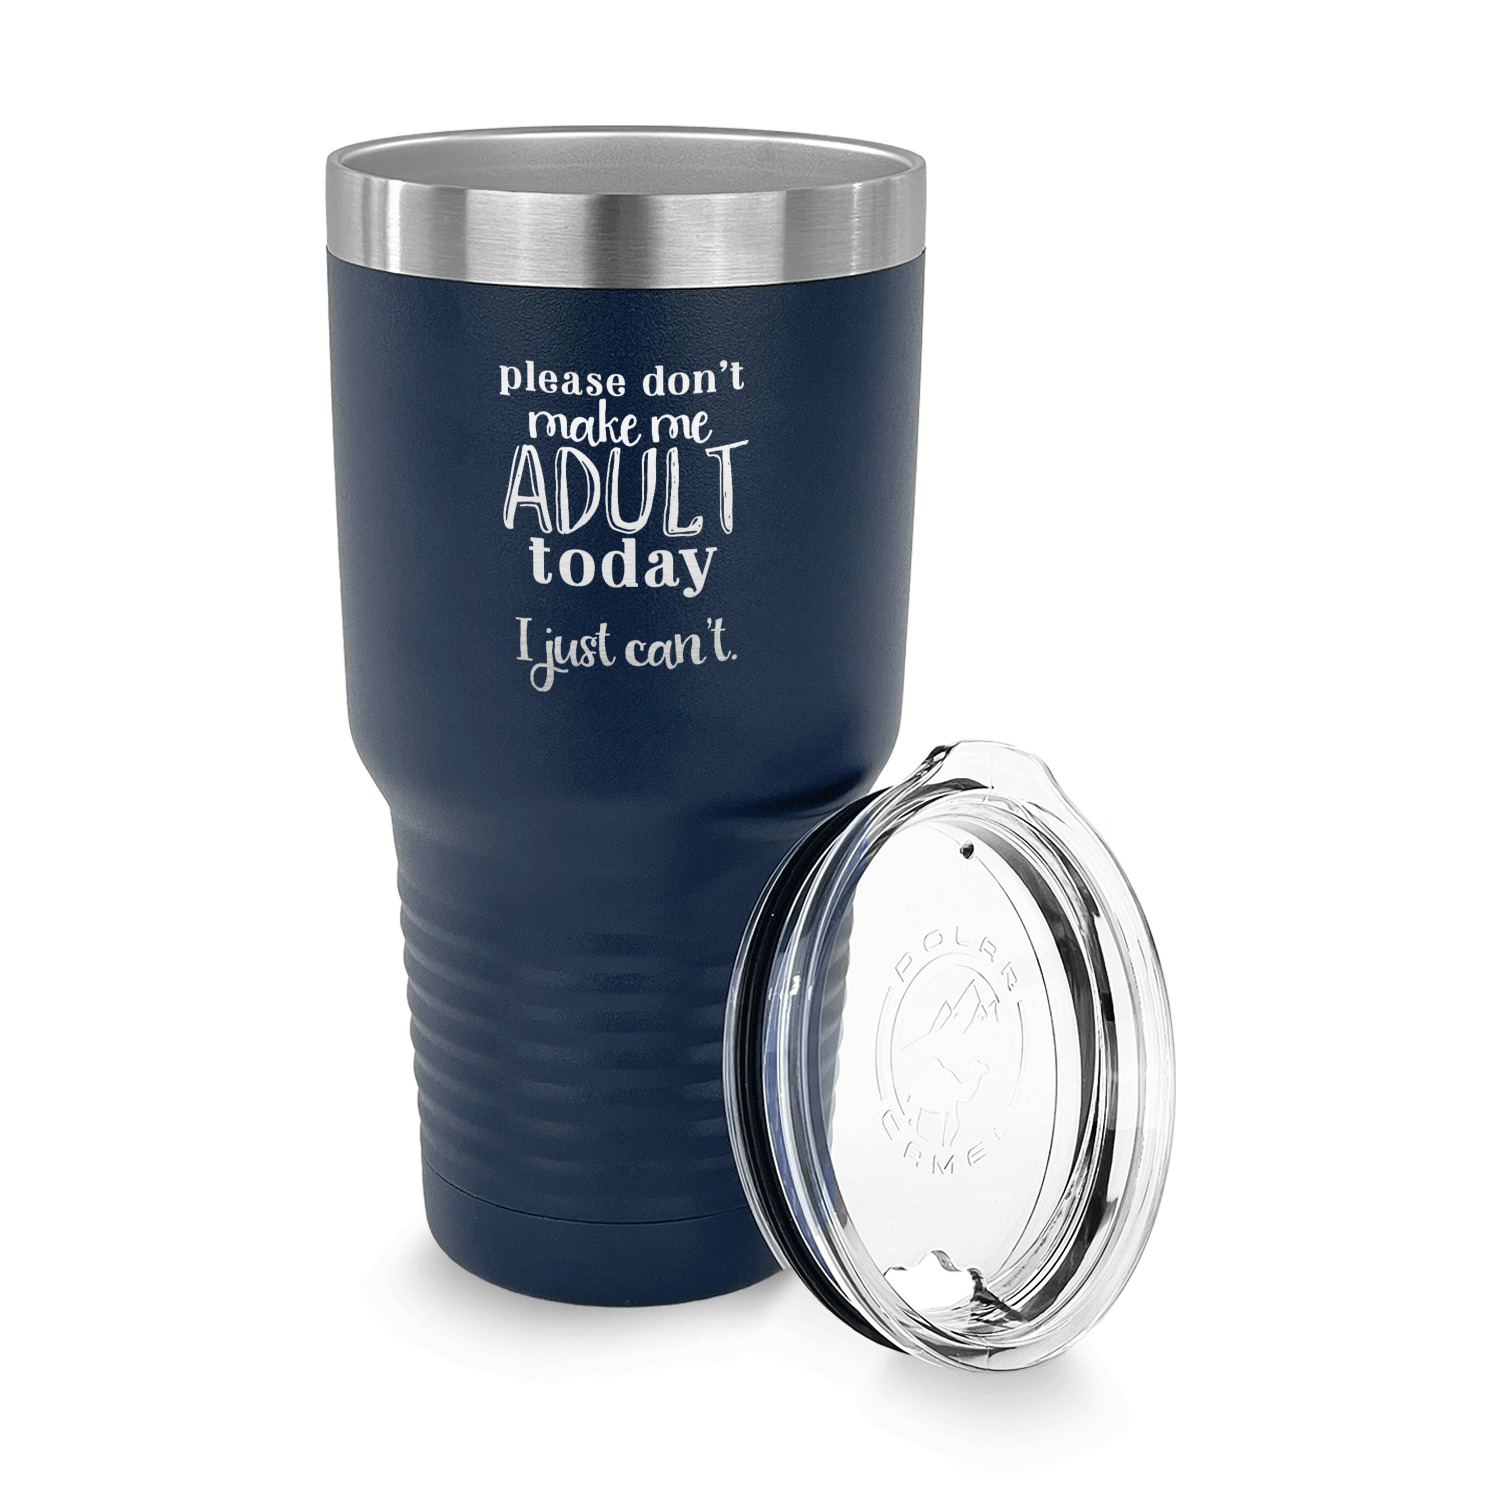 https://www.youcustomizeit.com/common/MAKE/1038321/Funny-Quotes-and-Sayings-30-oz-Stainless-Steel-Ringneck-Tumblers-Navy-LID-OFF.jpg?lm=1655154927